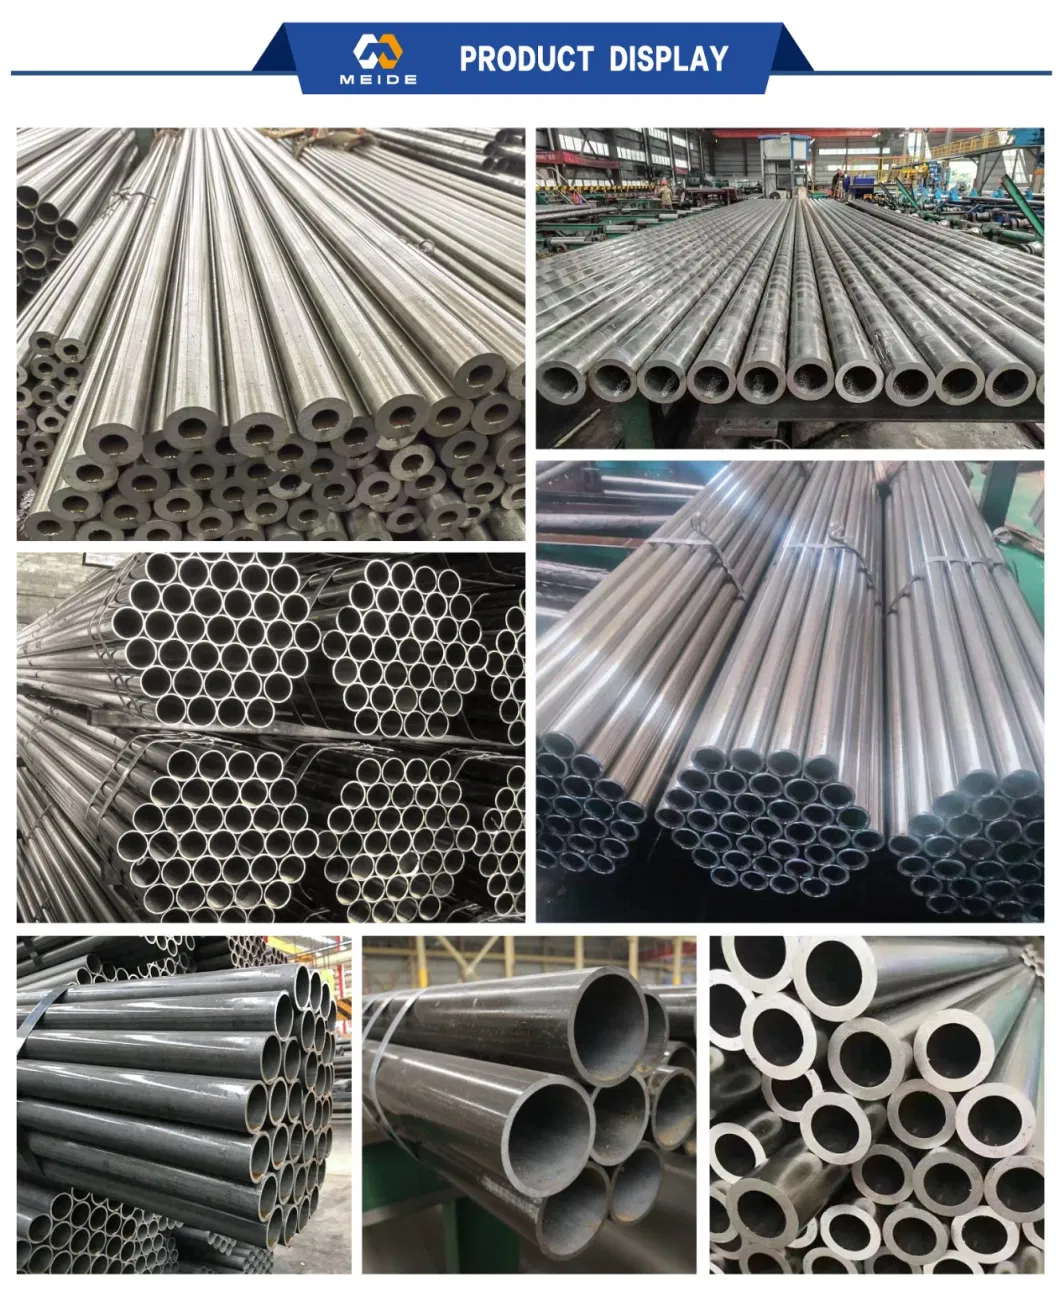 17mm 19mm 23mm 27mm 0.5mm Round Mild Steel Tubes Pipes ASTM 4140 4130 5140 30cr High Precision Seamless Alloy Steel Tube